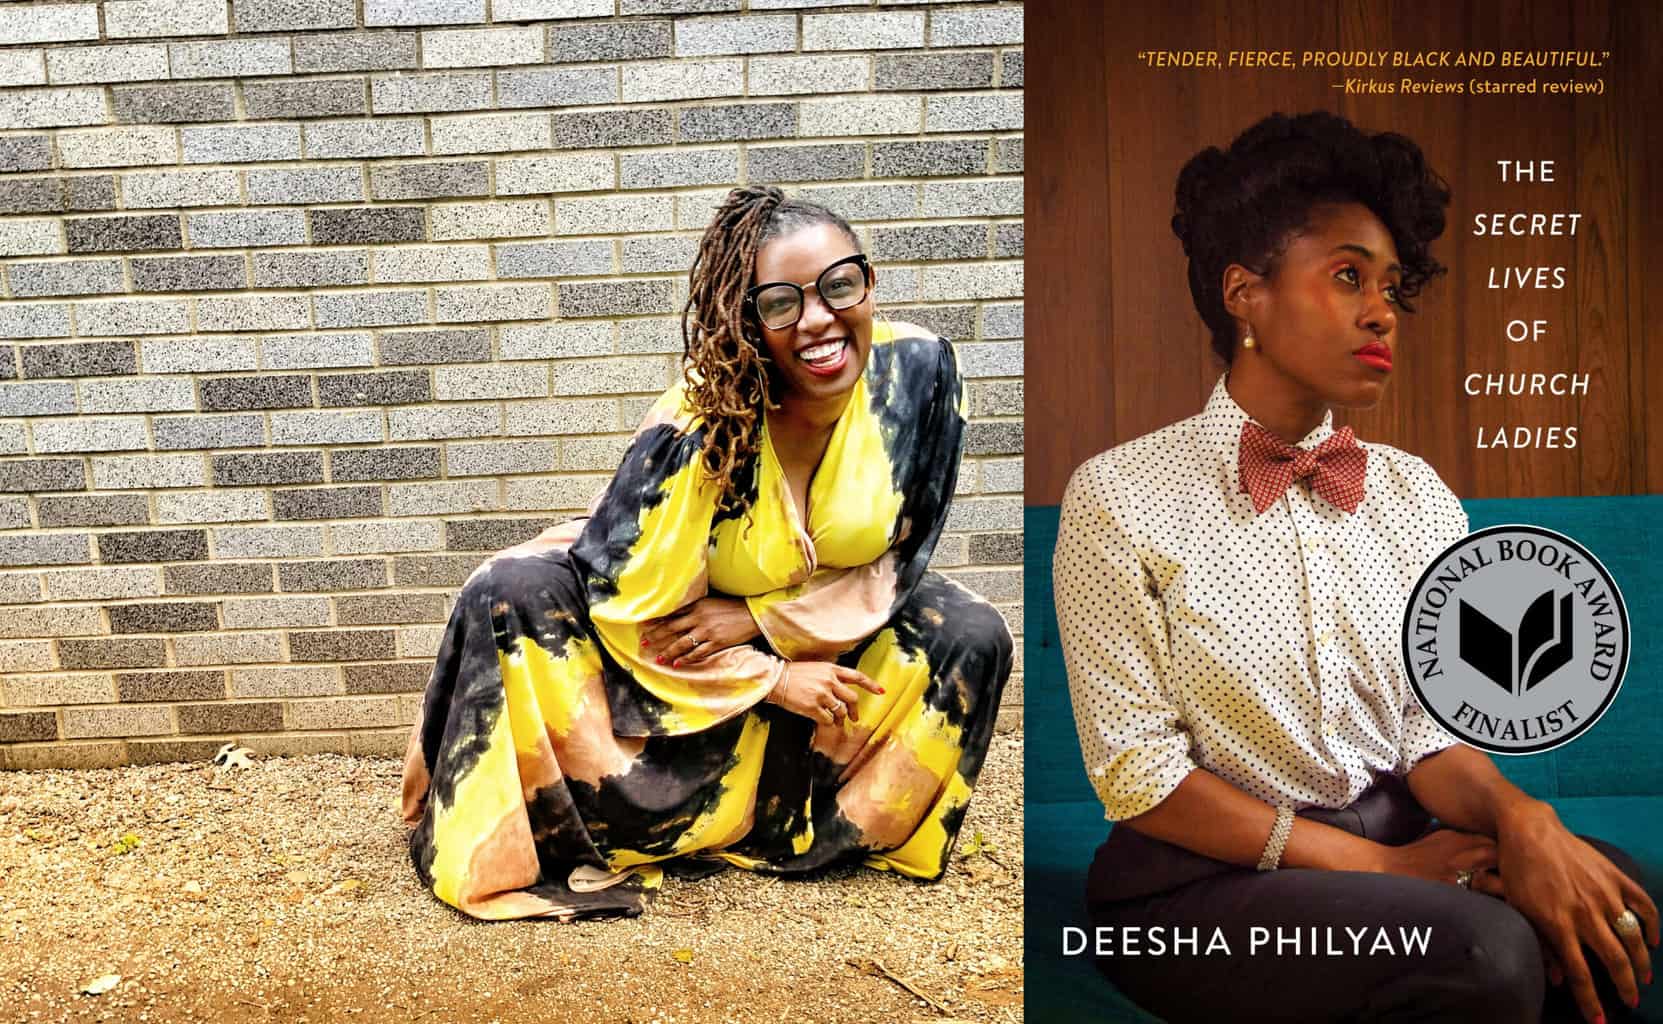 Secret Lives of Church Ladies Author Deesha Philyaw Signs with Curate